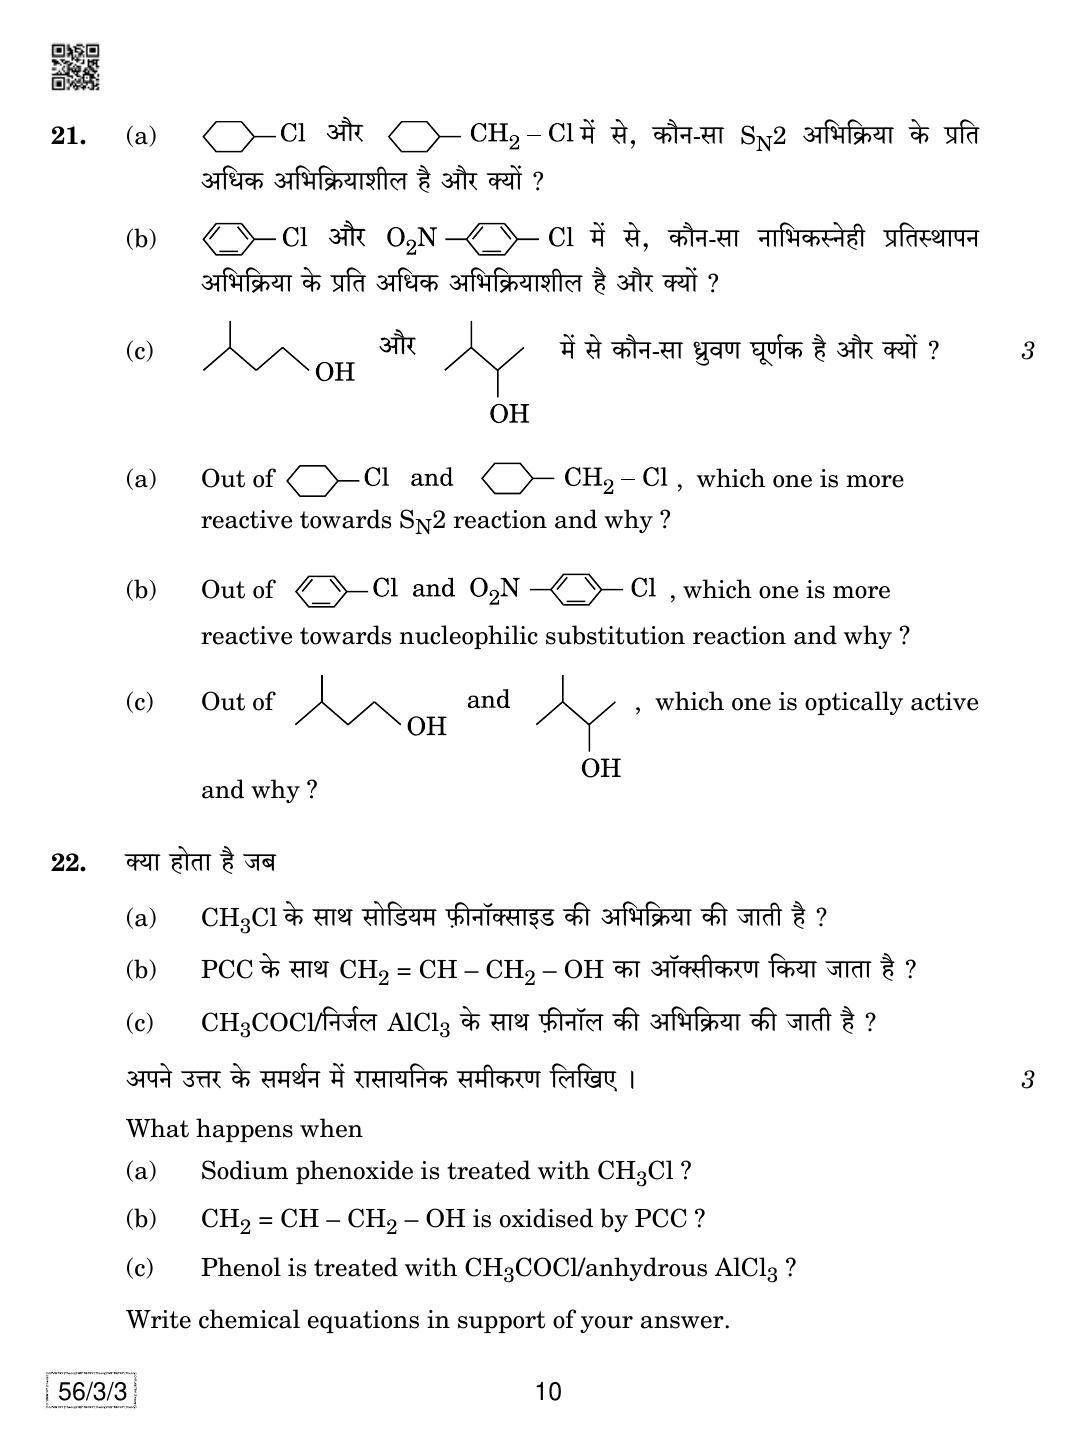 CBSE Class 12 56-3-3 Chemistry 2019 Question Paper - Page 10